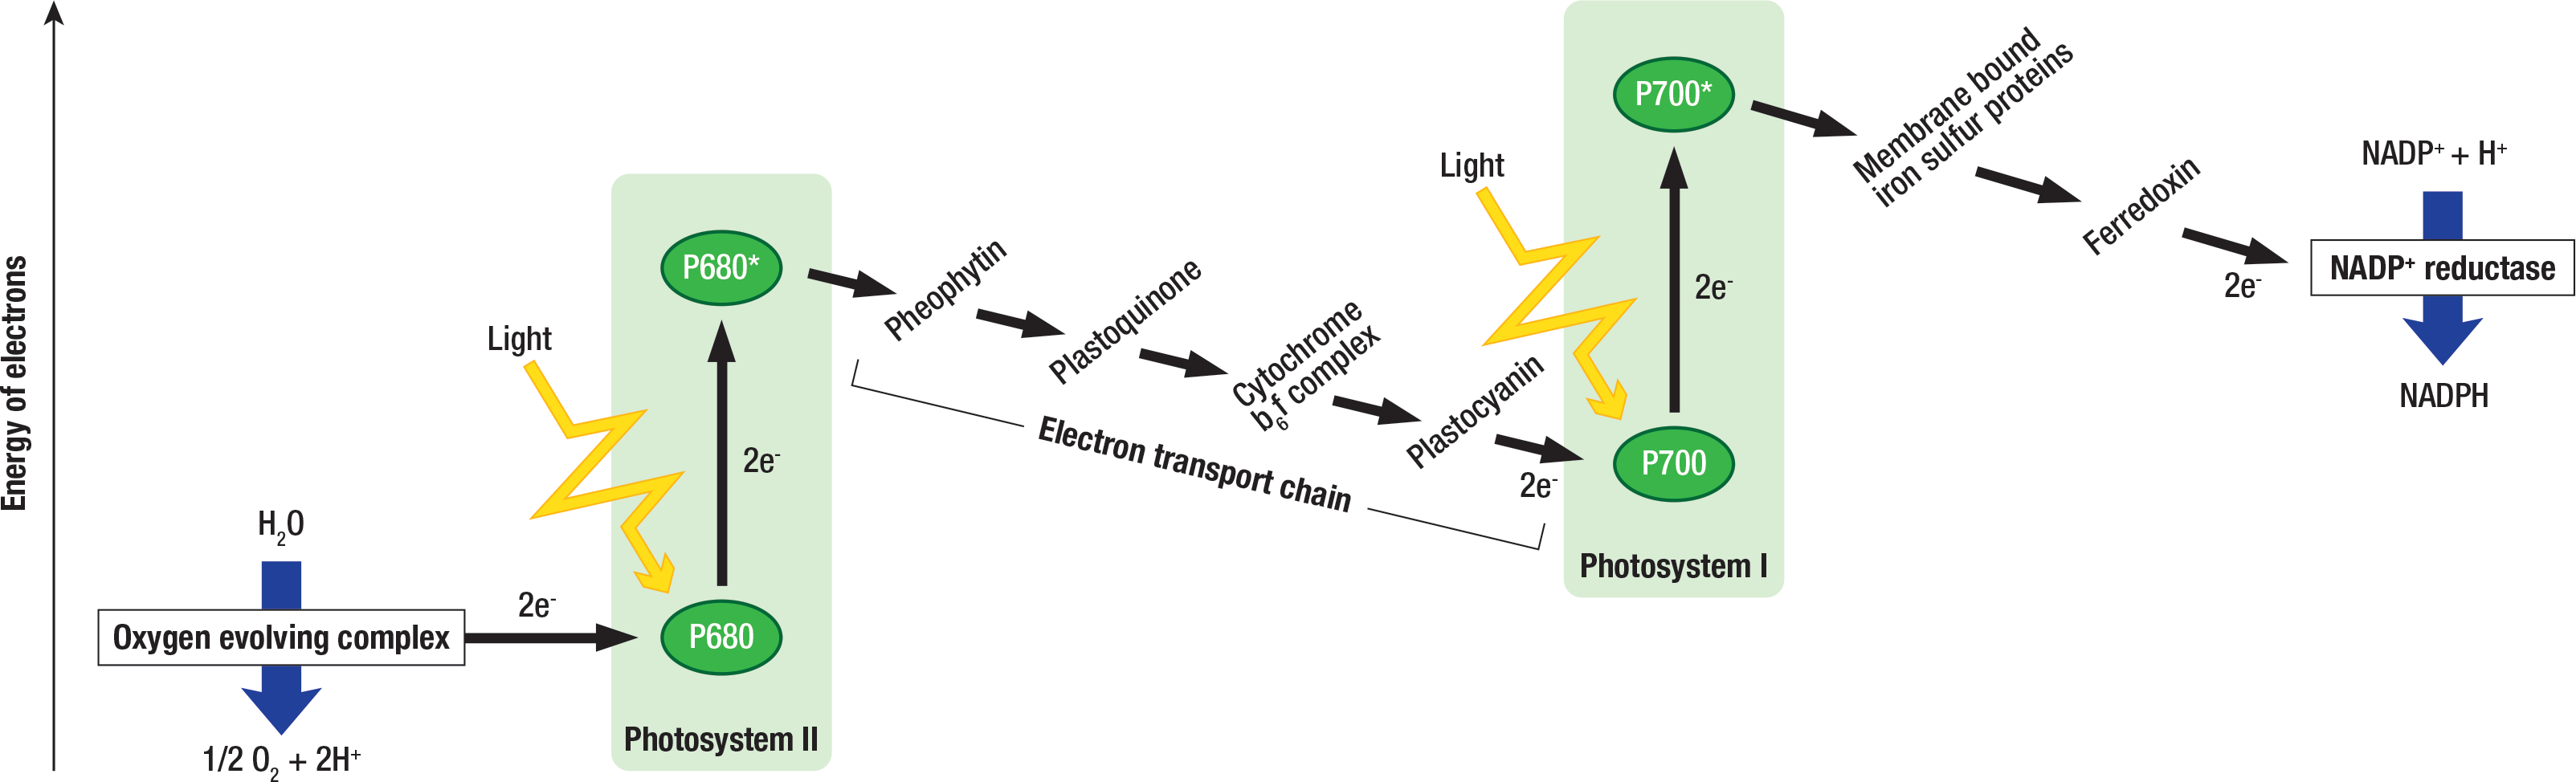 A photosynthesis Z-scheme shows the flow of electrons spatially and temporally on the x-axis and the energy of the electrons on the y-axis